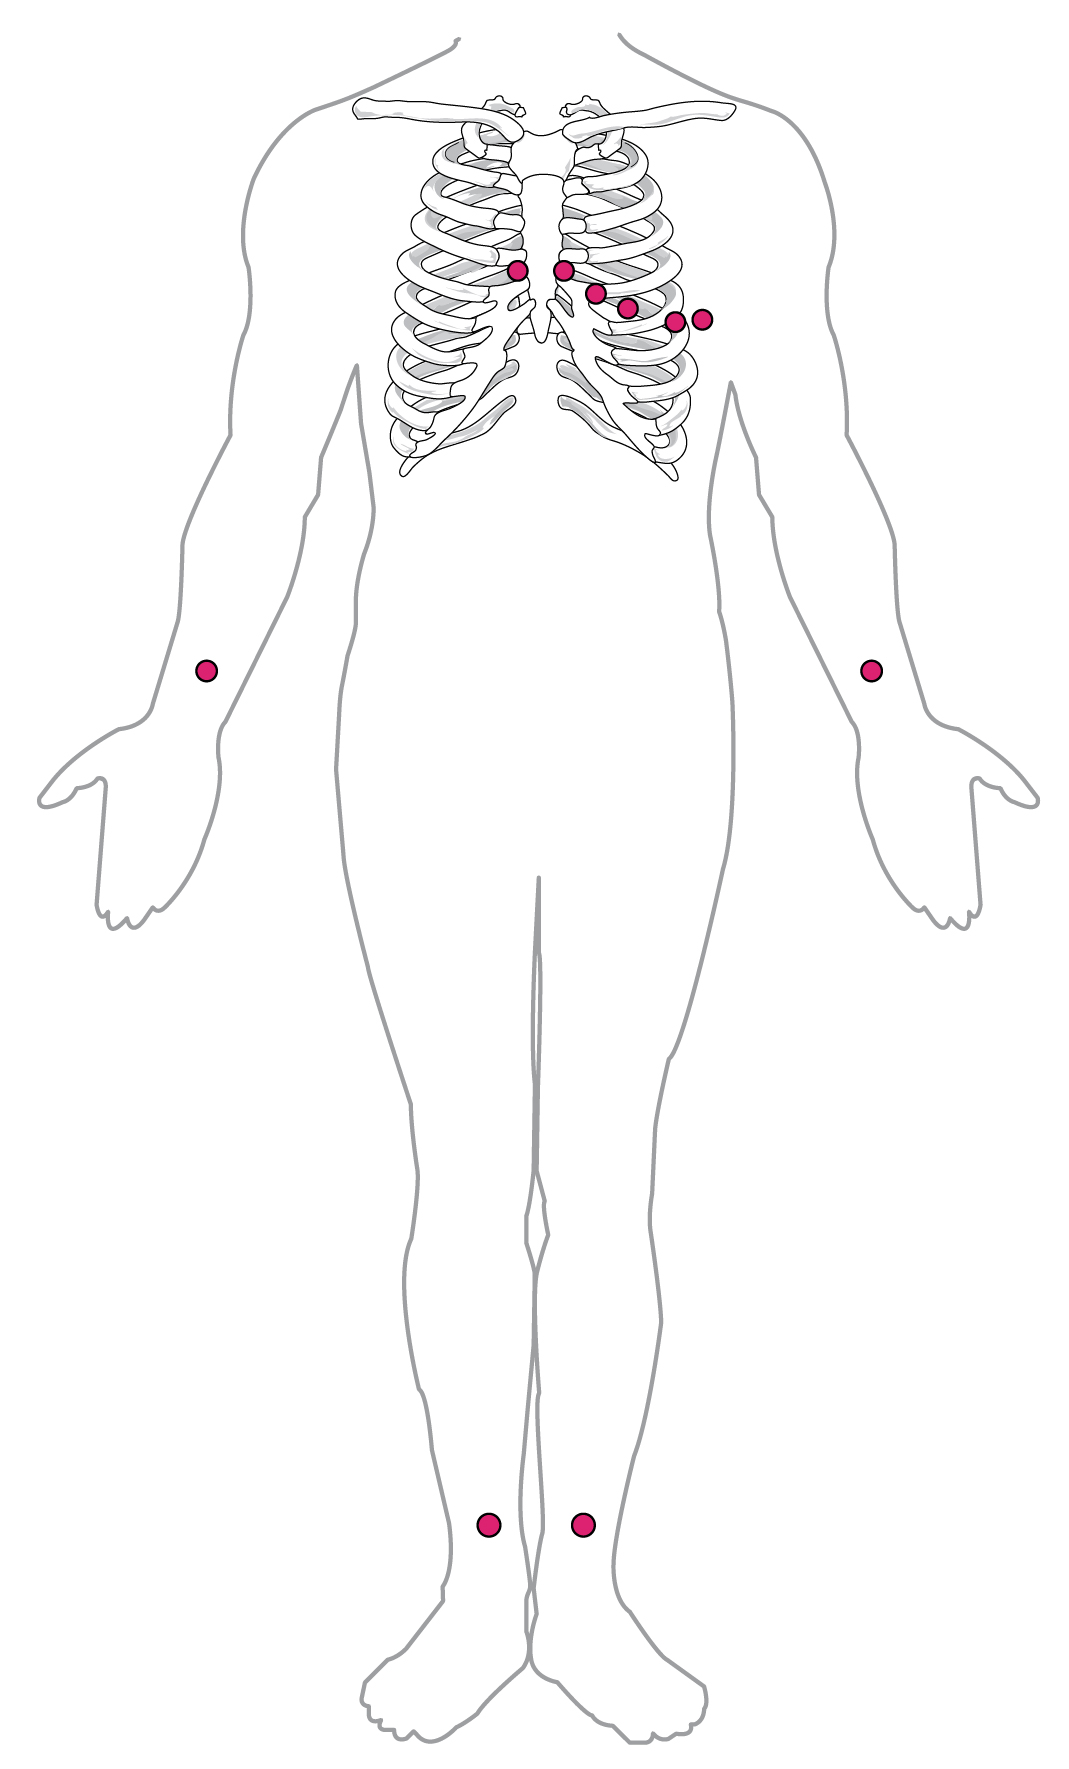 2021_ECG_Placement_of_Electrodes.jpg